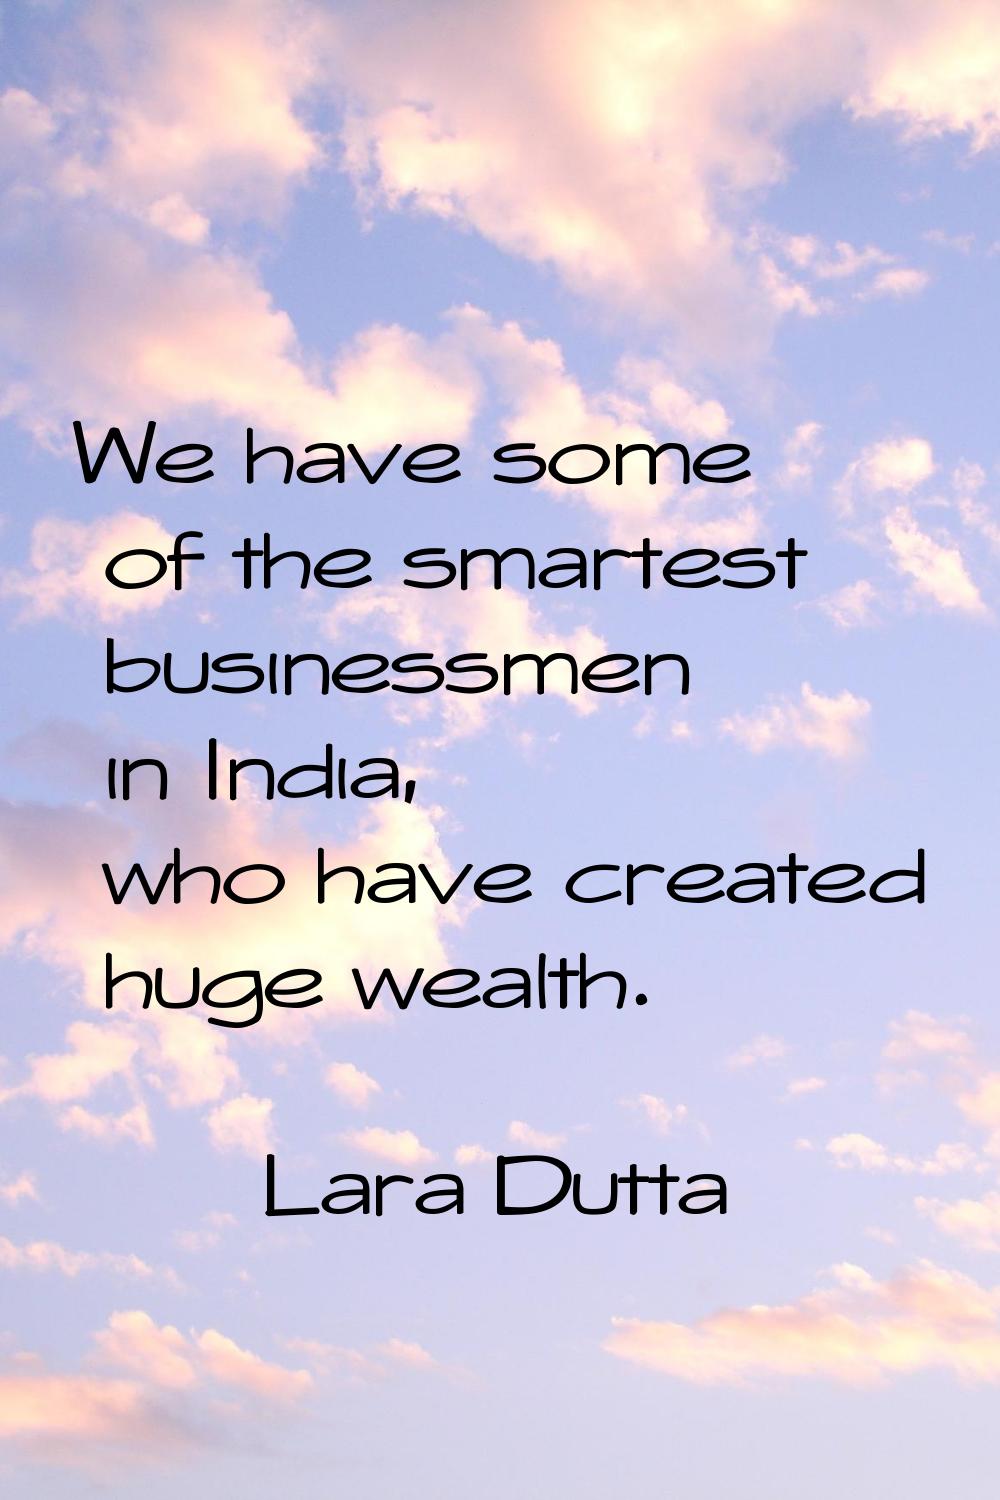 We have some of the smartest businessmen in India, who have created huge wealth.